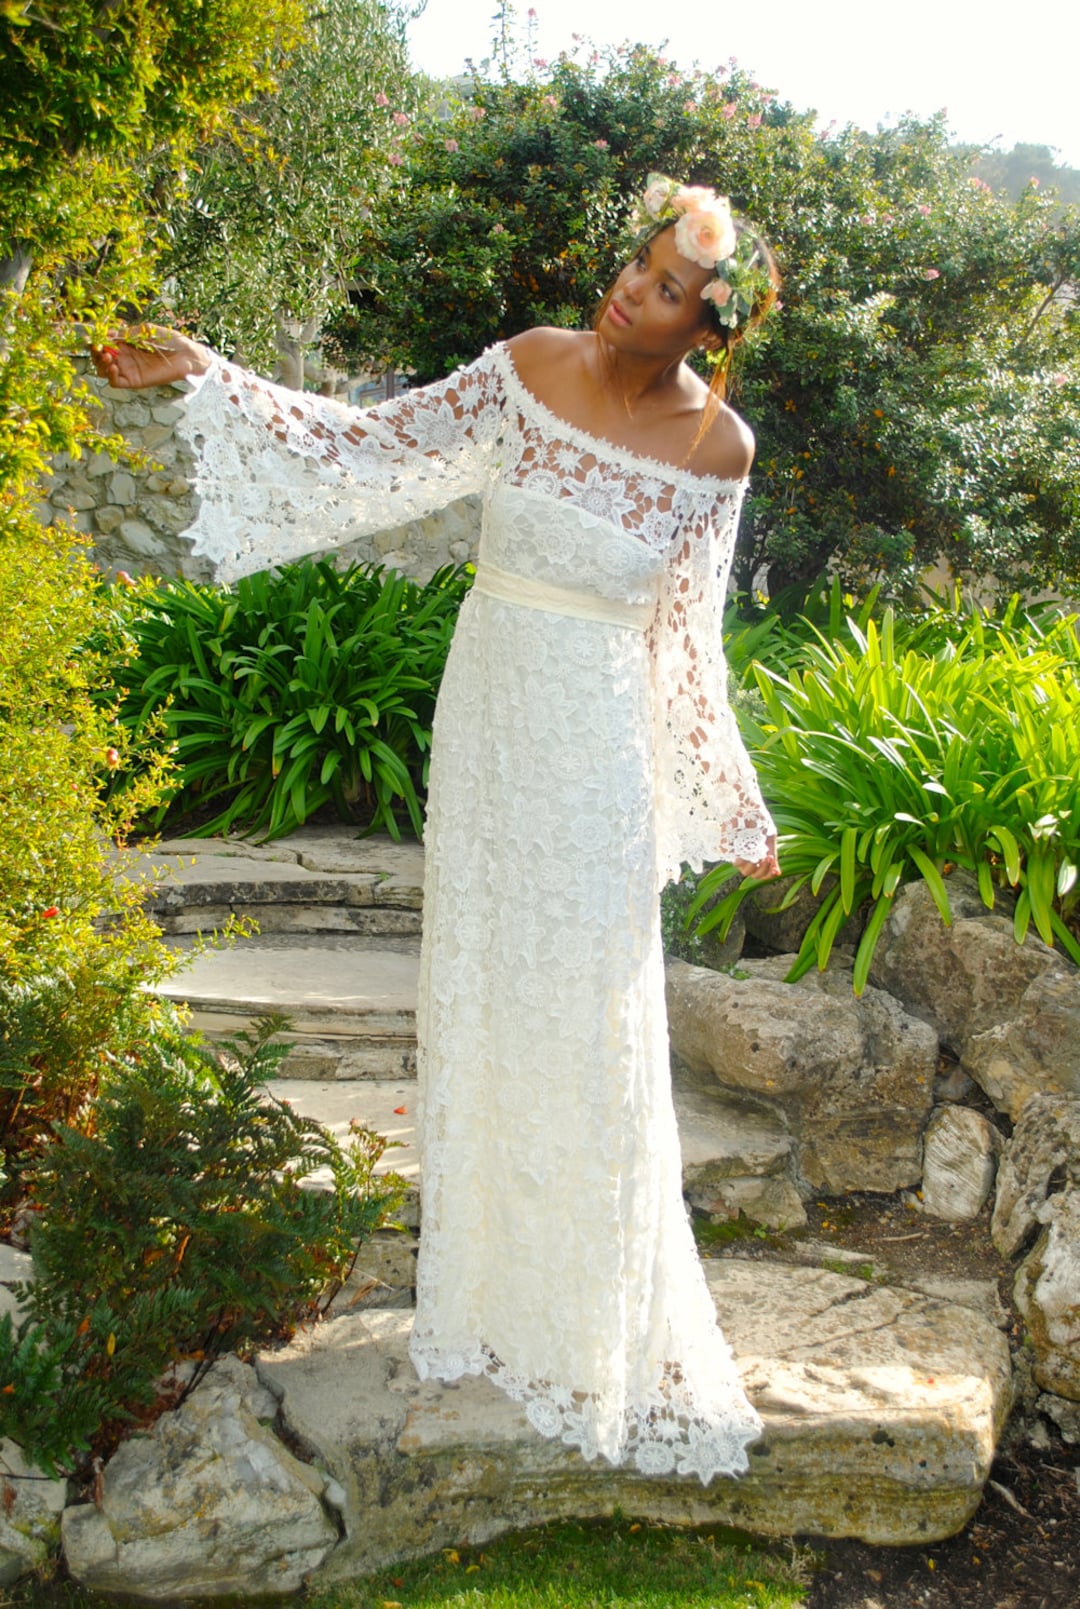 Boho Sheer O Neck Boho Lace Wedding Dress 2021 With Long Sleeves, Vintage  Crochet Bold Cotton Lace, And Hippie Country Bride Gown Style From  Alegant_lady, $143.32